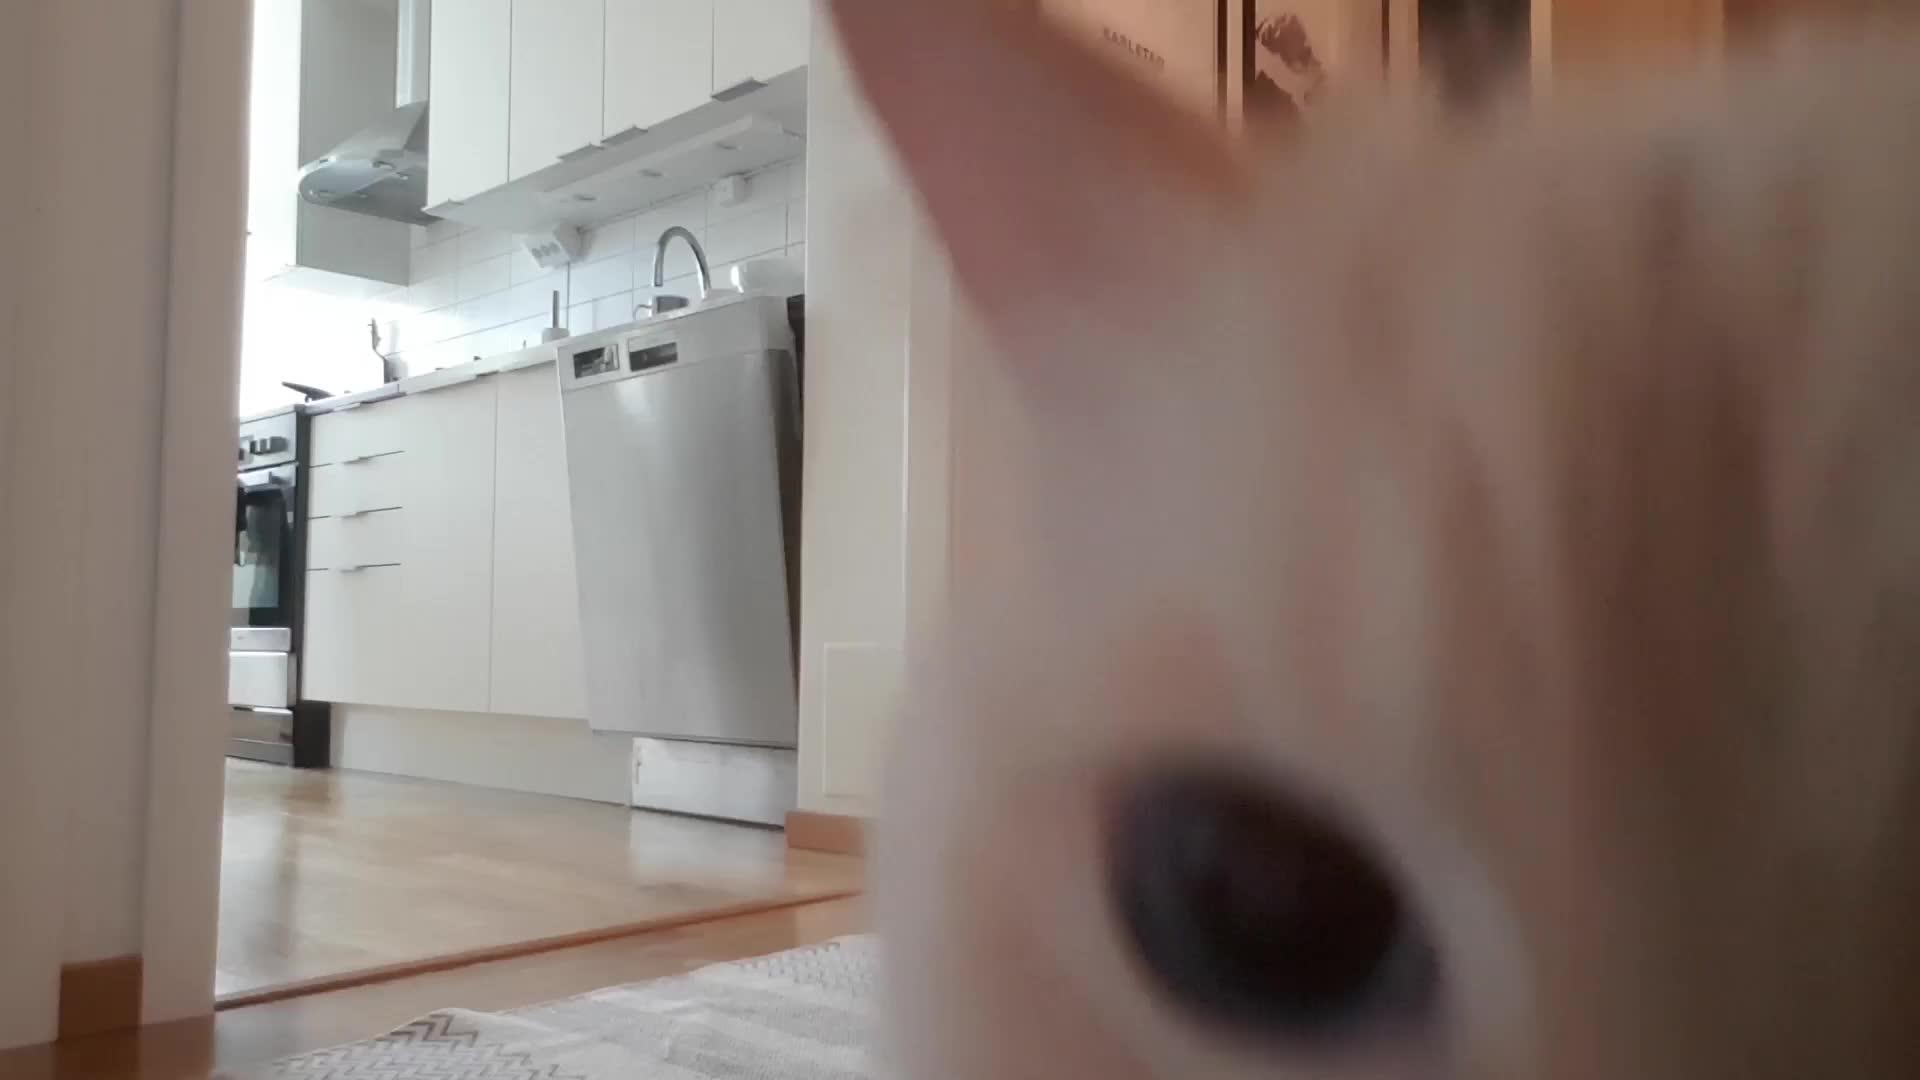 “Left My Cat Alone With A Camera For 30 Minutes And Now I Can Never Leave Again”